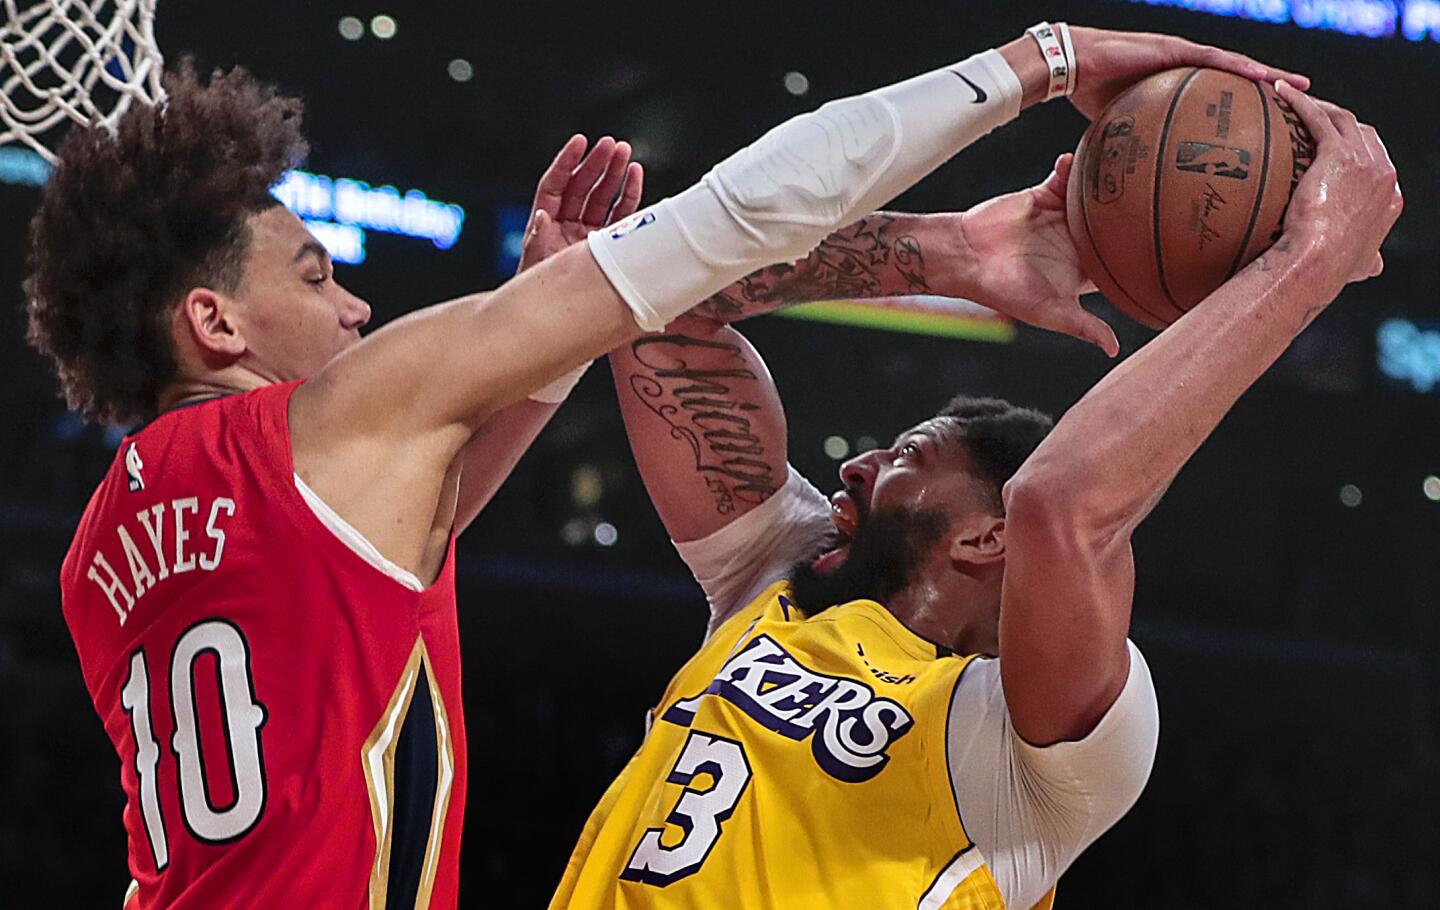 Pelicans center Jaxson Hayes fouls Lakers forward Anthony Davis in the first half Friday night. Davis finished with 46 points.